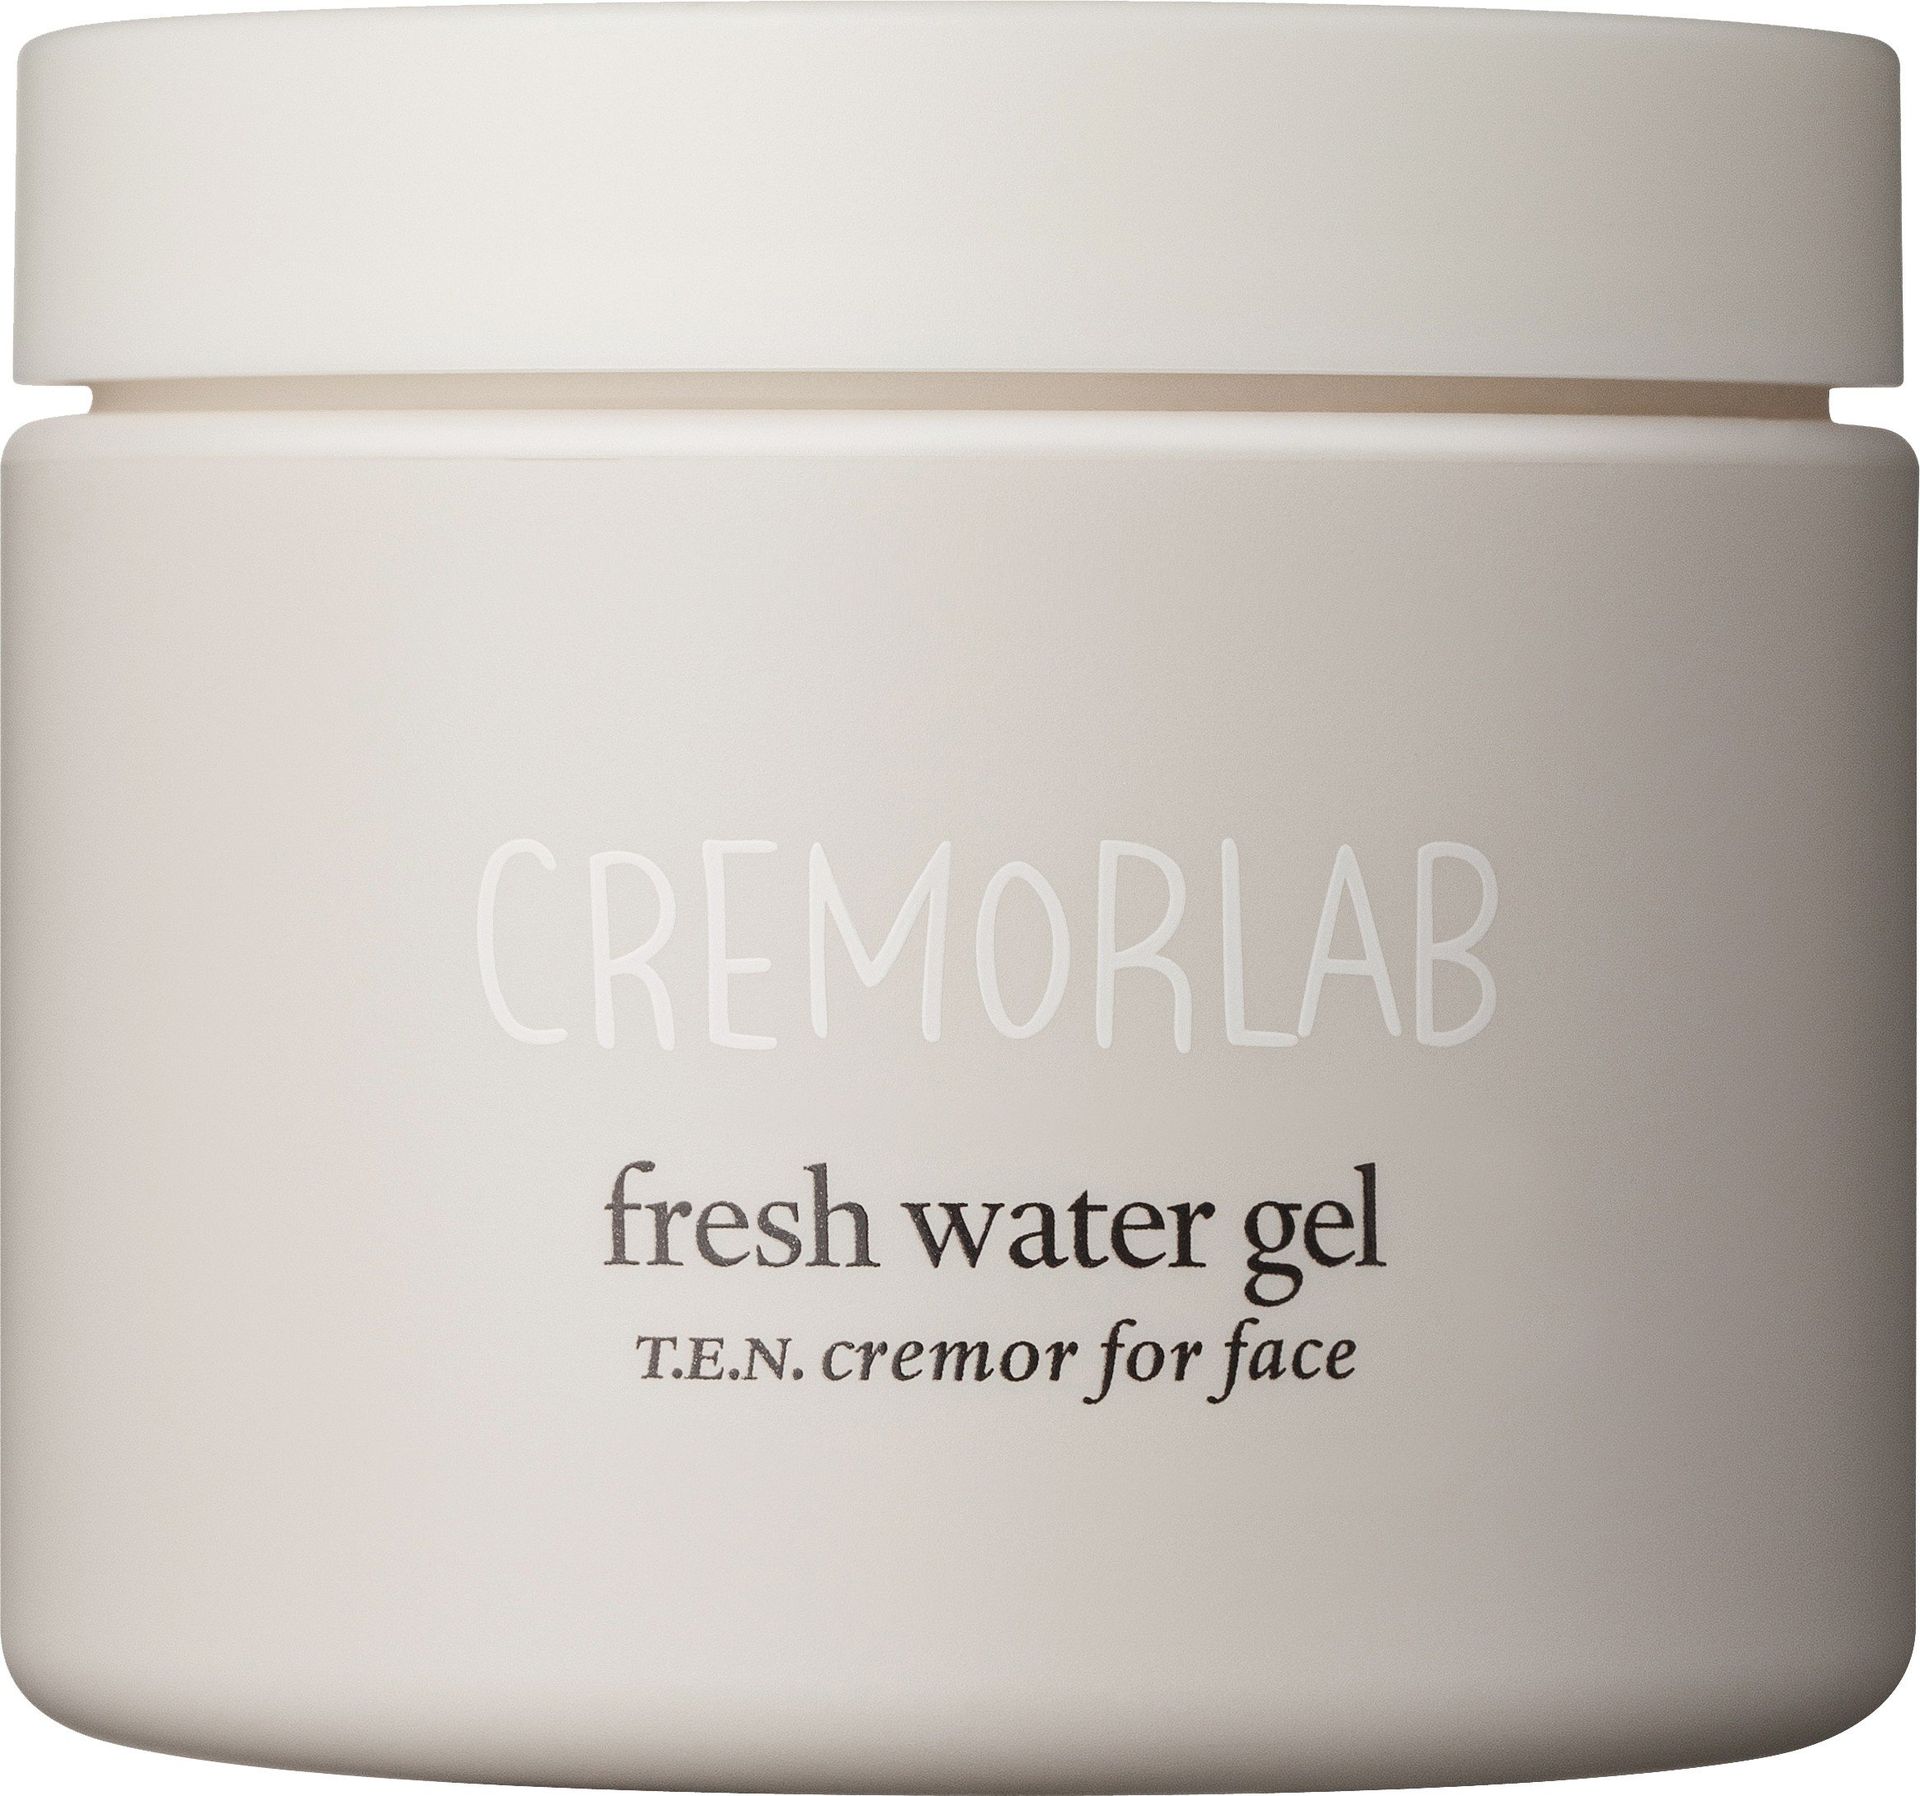 T.E.N. CREMOR FOR FACE FRESH WATER GEL